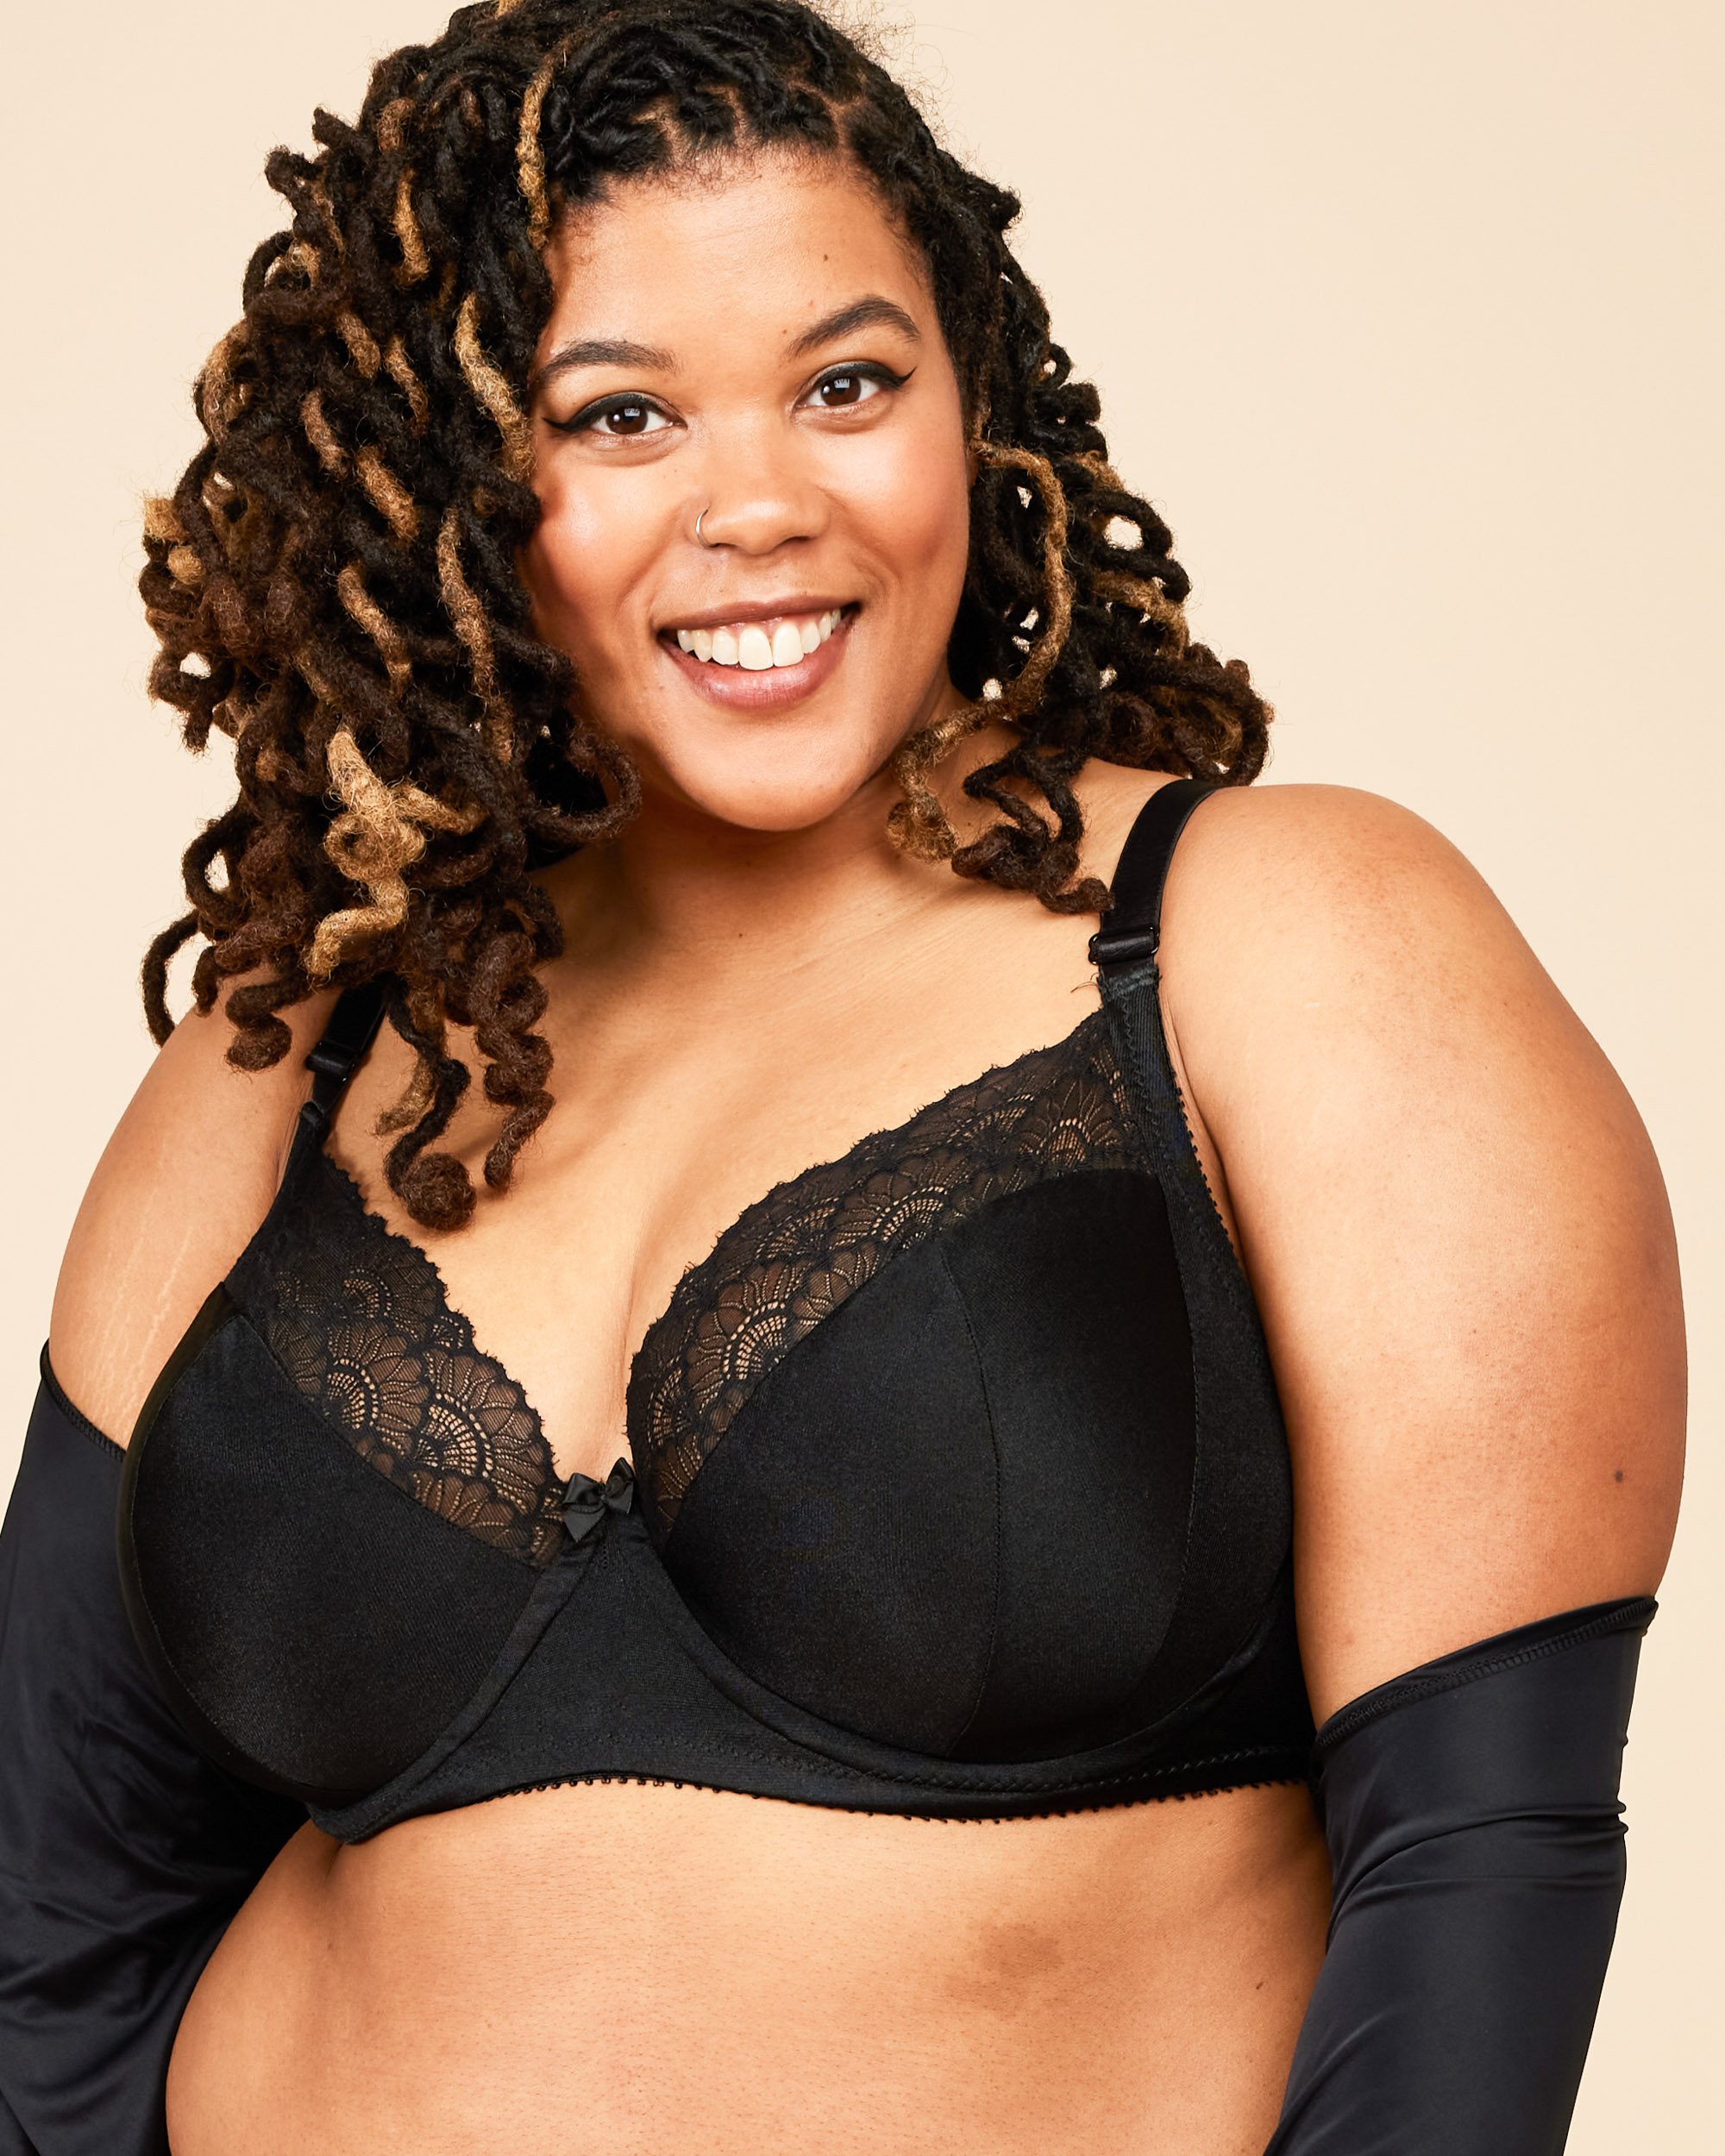 Plus Size Bras for Women Border Large Underwear In Europe And